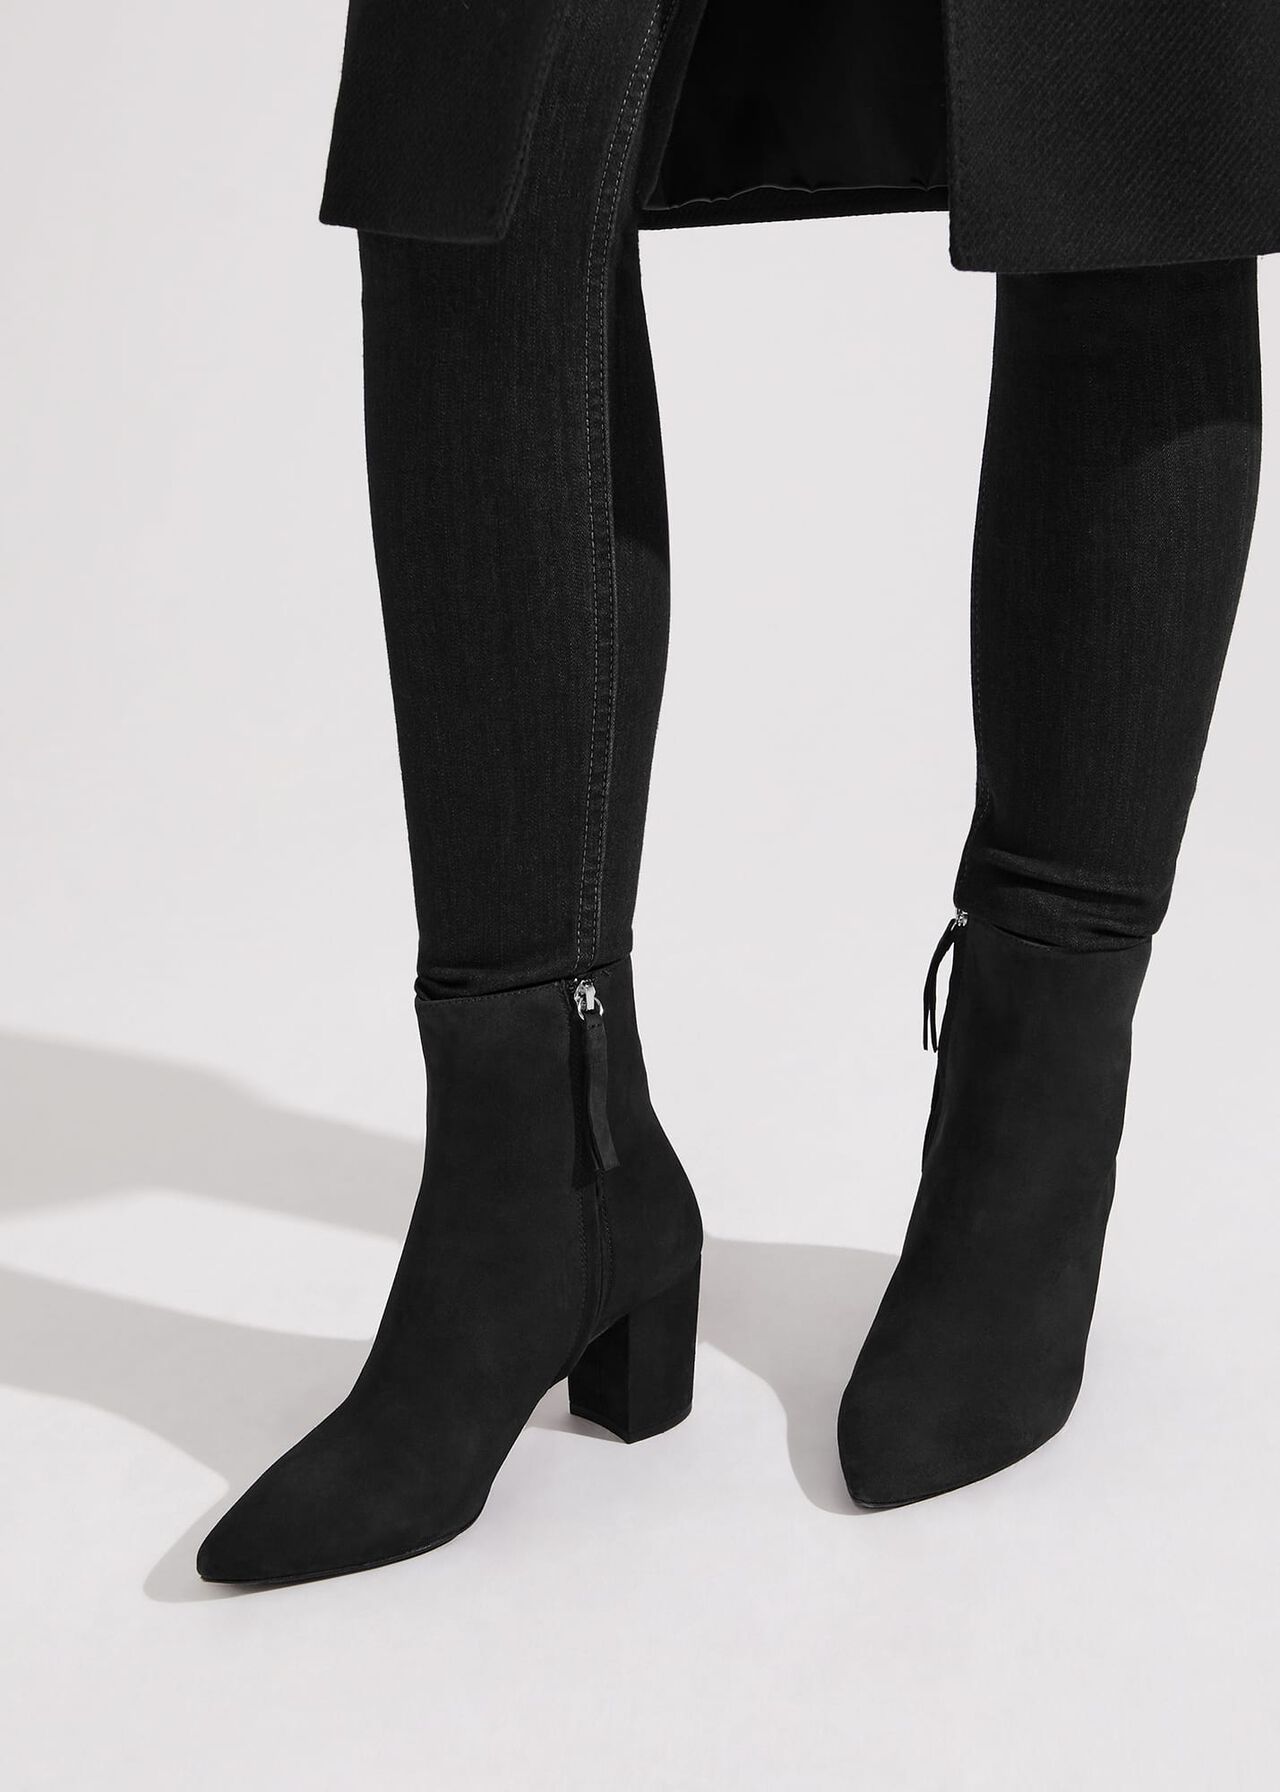 Lyra Ankle Boots, Navy, hi-res